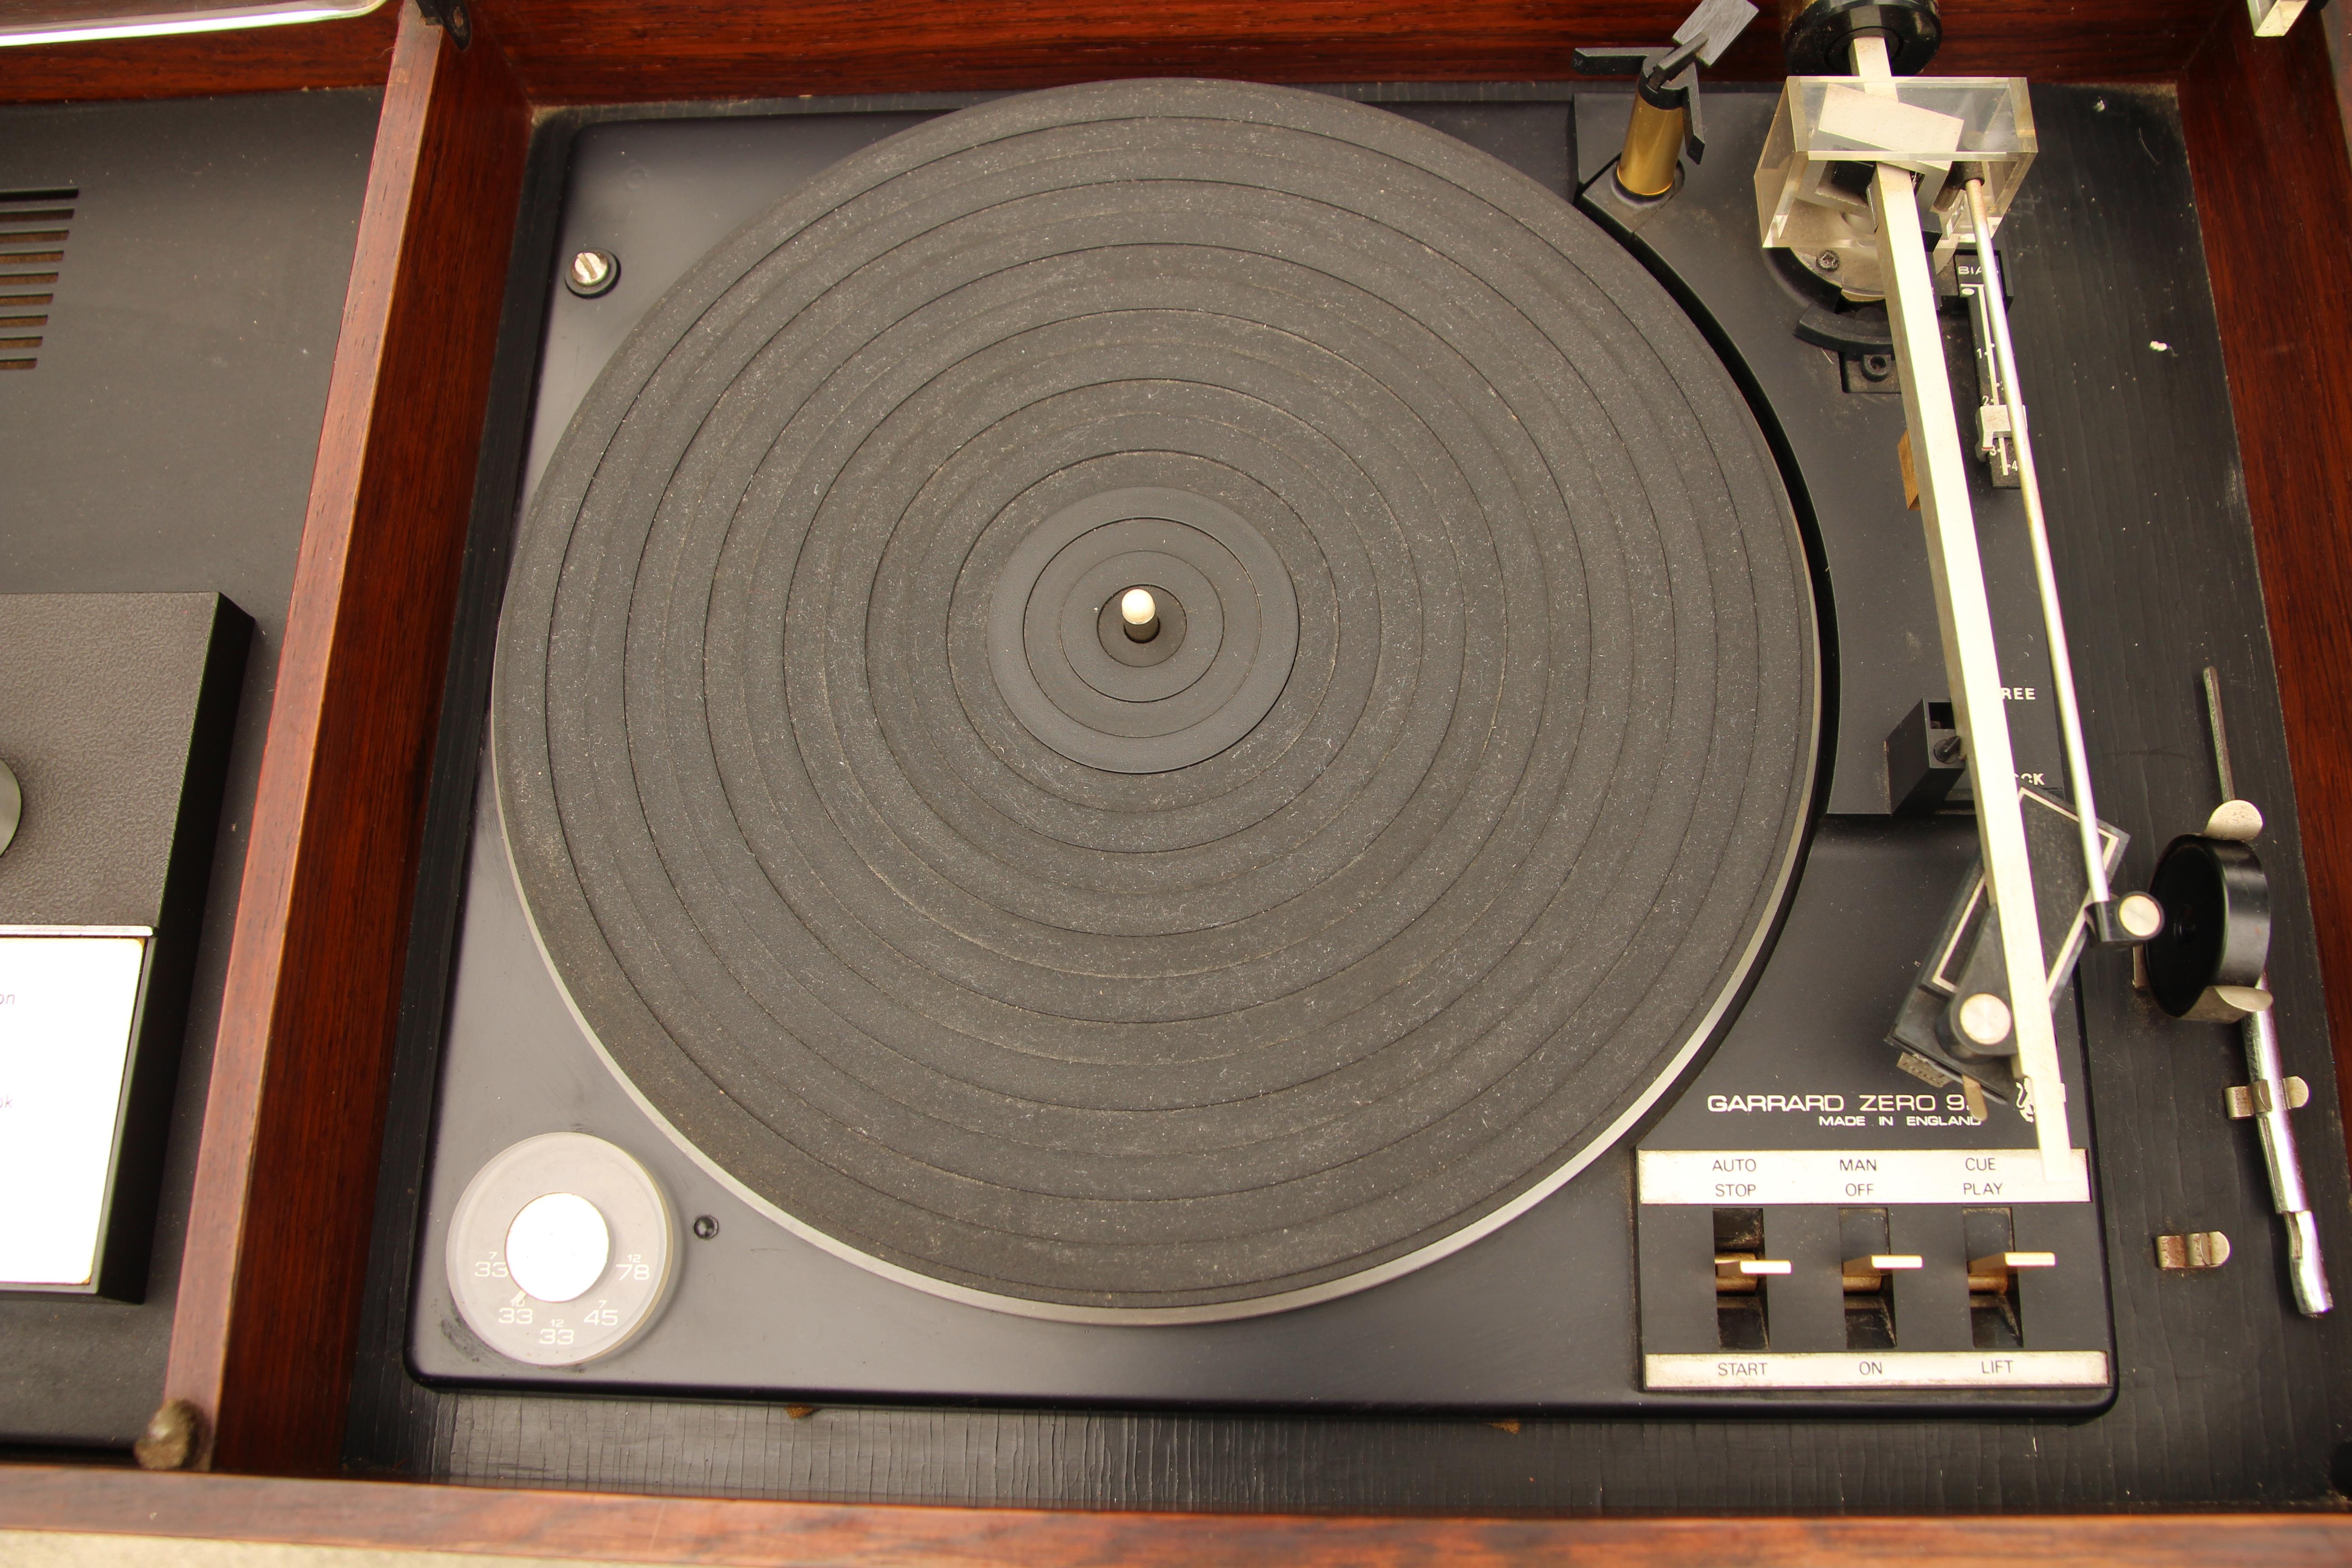 Clairtone Project G2 Series T11 Console Stereo System & Garrard Turntable en vente 9